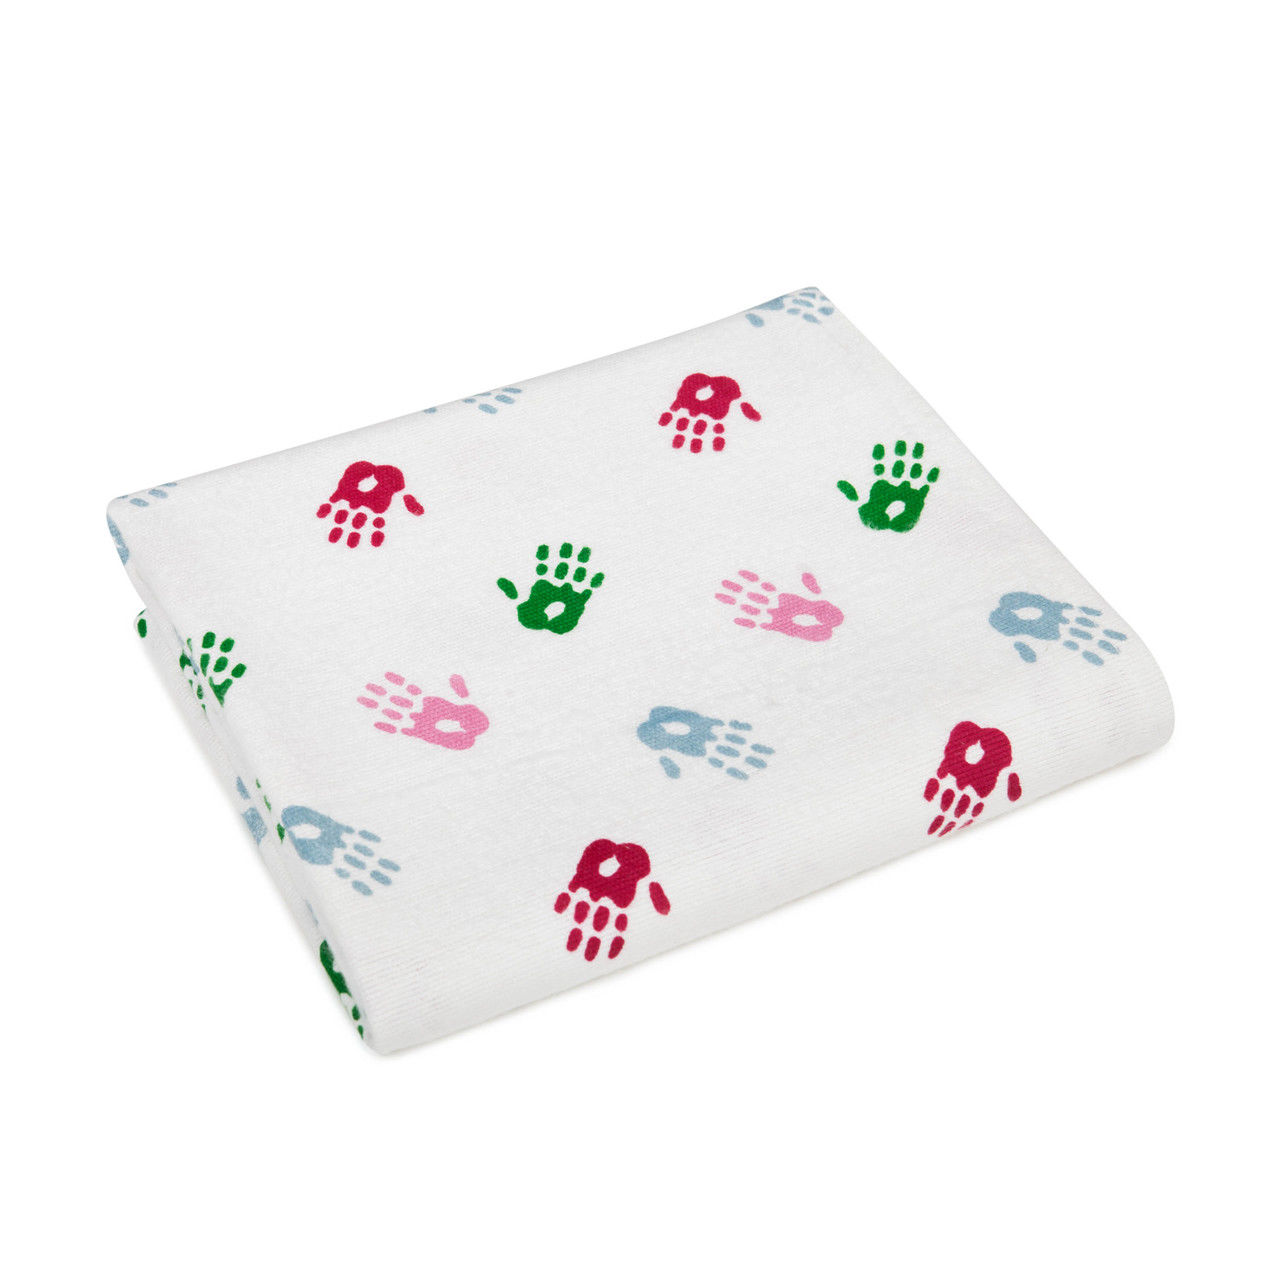 Is the baby hospital blanket designed to cater to newborns and infants?